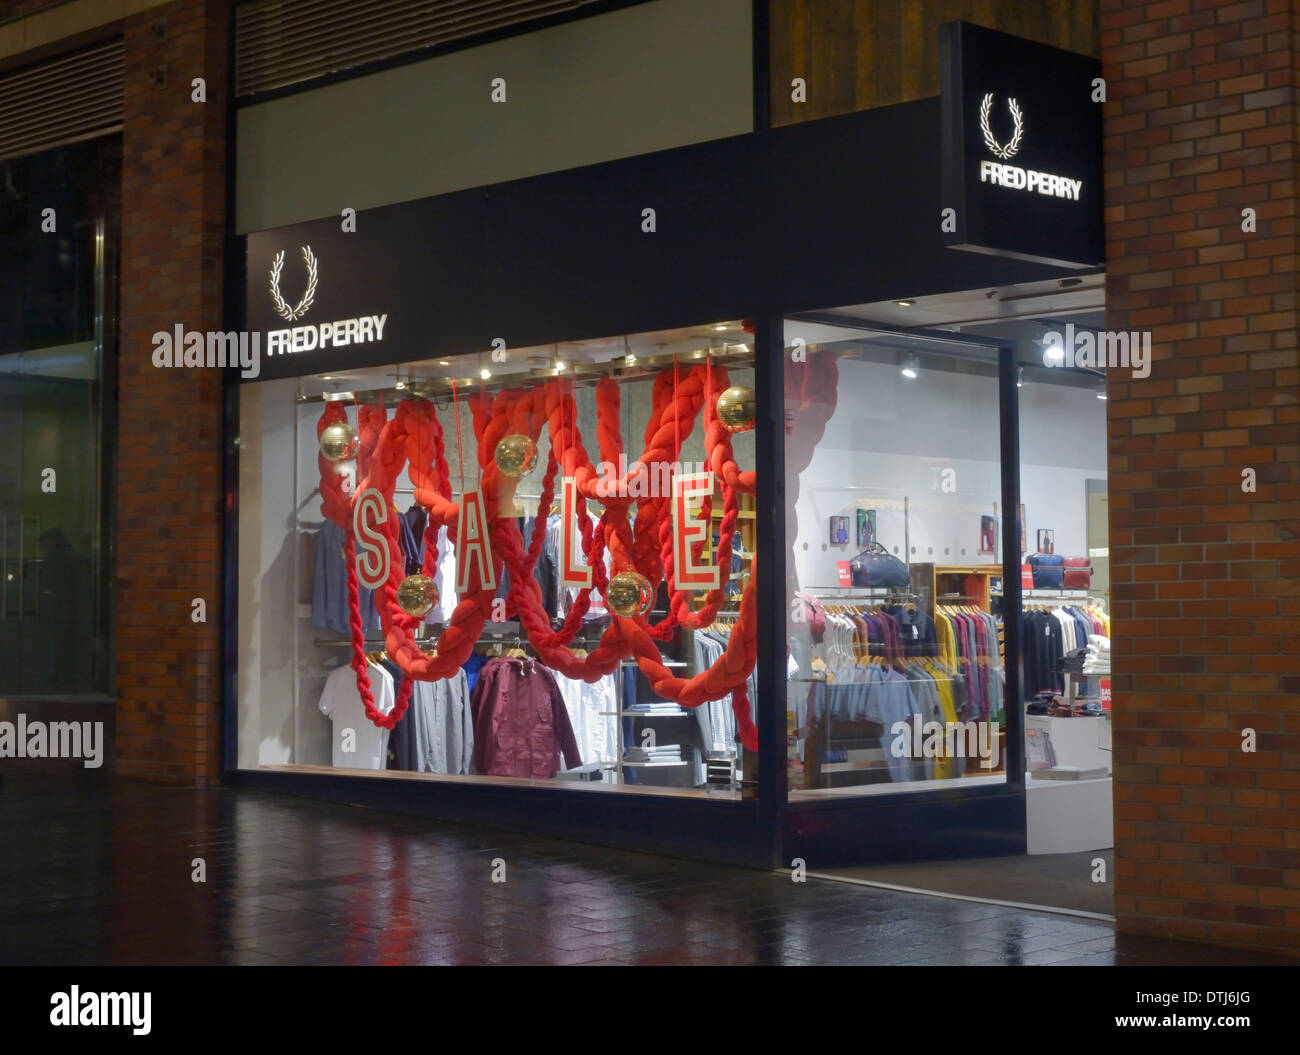 Fred Perry store in Liverpool with SALE notice displayed Stock Photo - Alamy